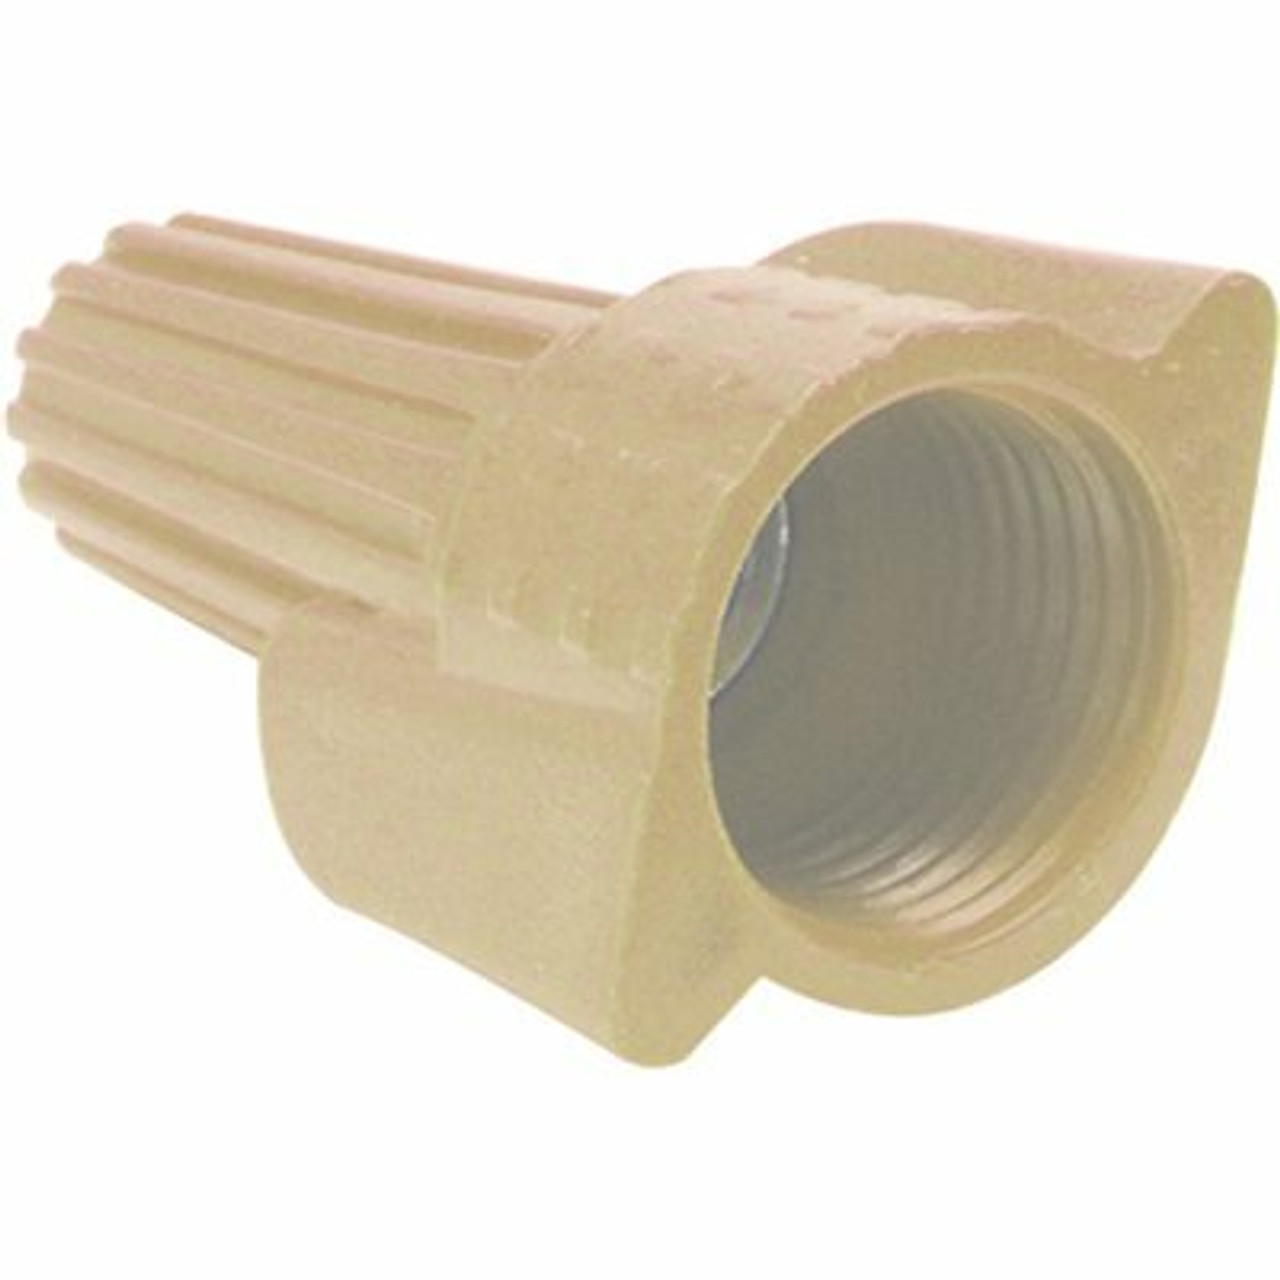 Preferred Industries Wing-Type Wire Connector, Tan (500-Pack)